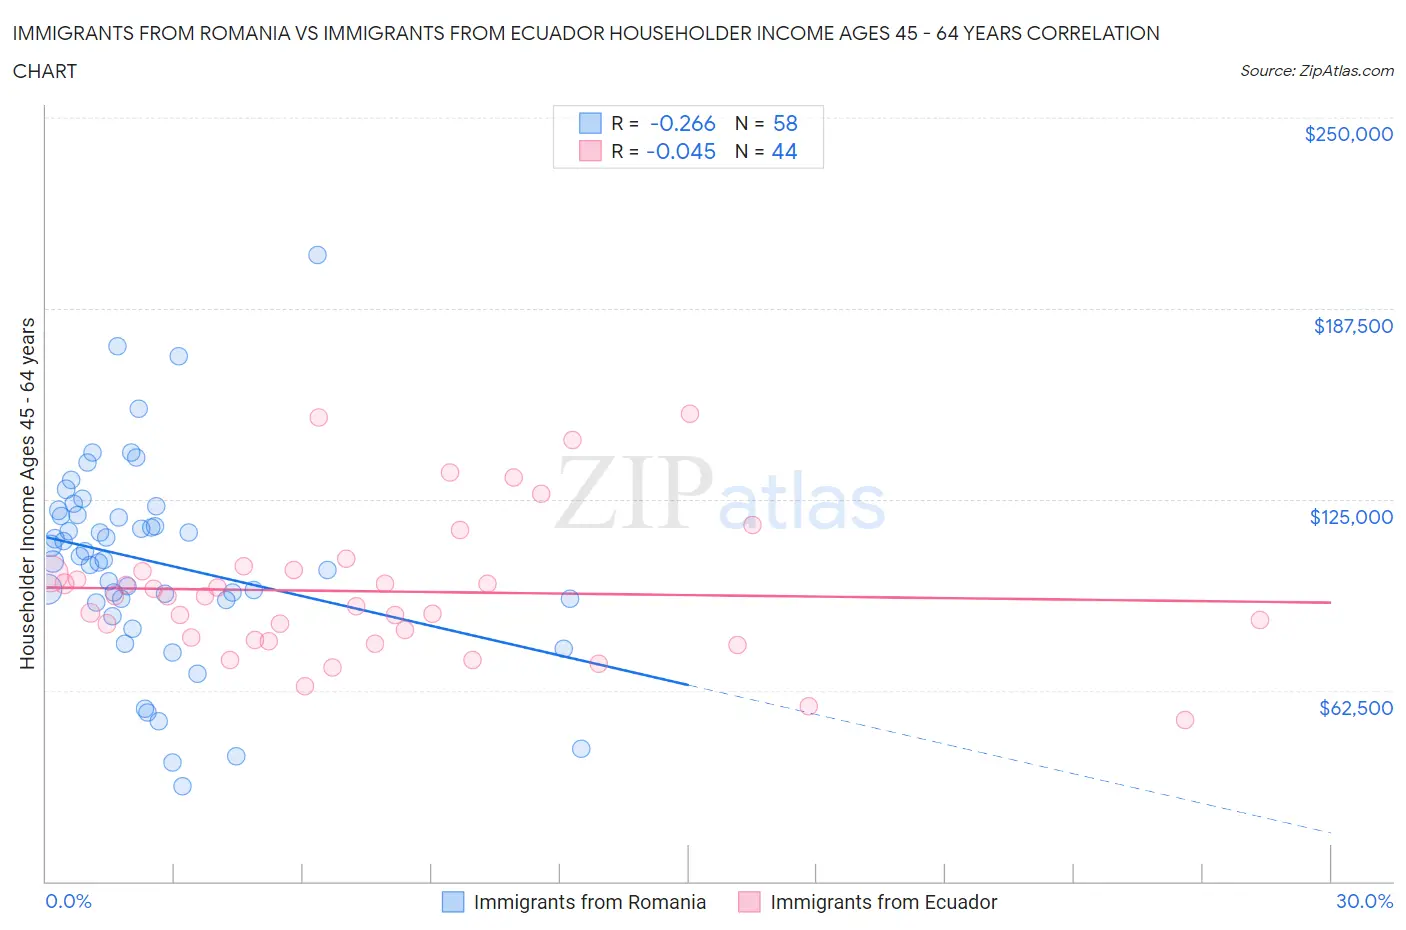 Immigrants from Romania vs Immigrants from Ecuador Householder Income Ages 45 - 64 years